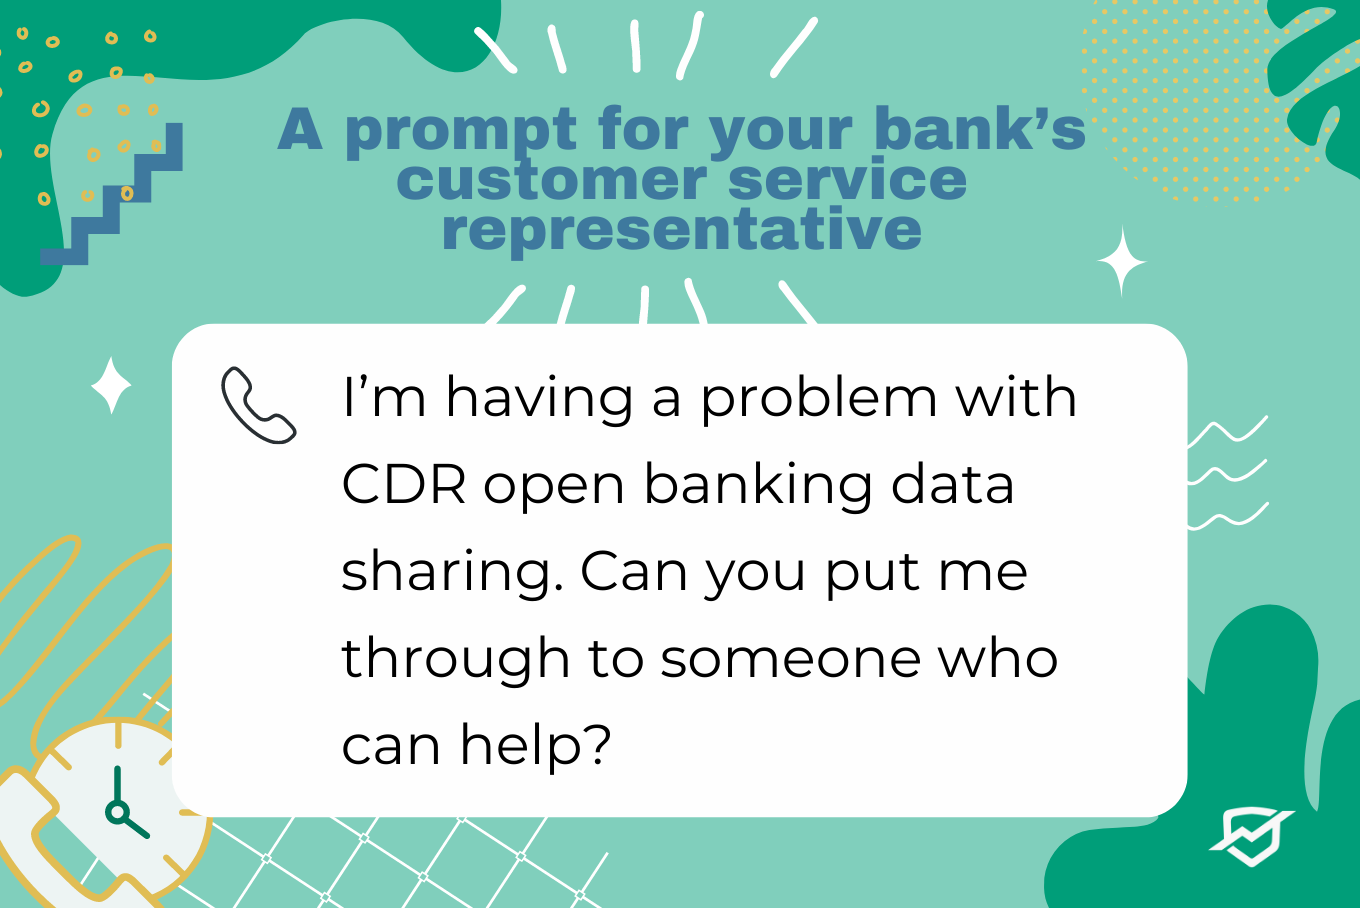 I'm having a problem with CDR open banking data sharing. Can you put me through to someone who can help?